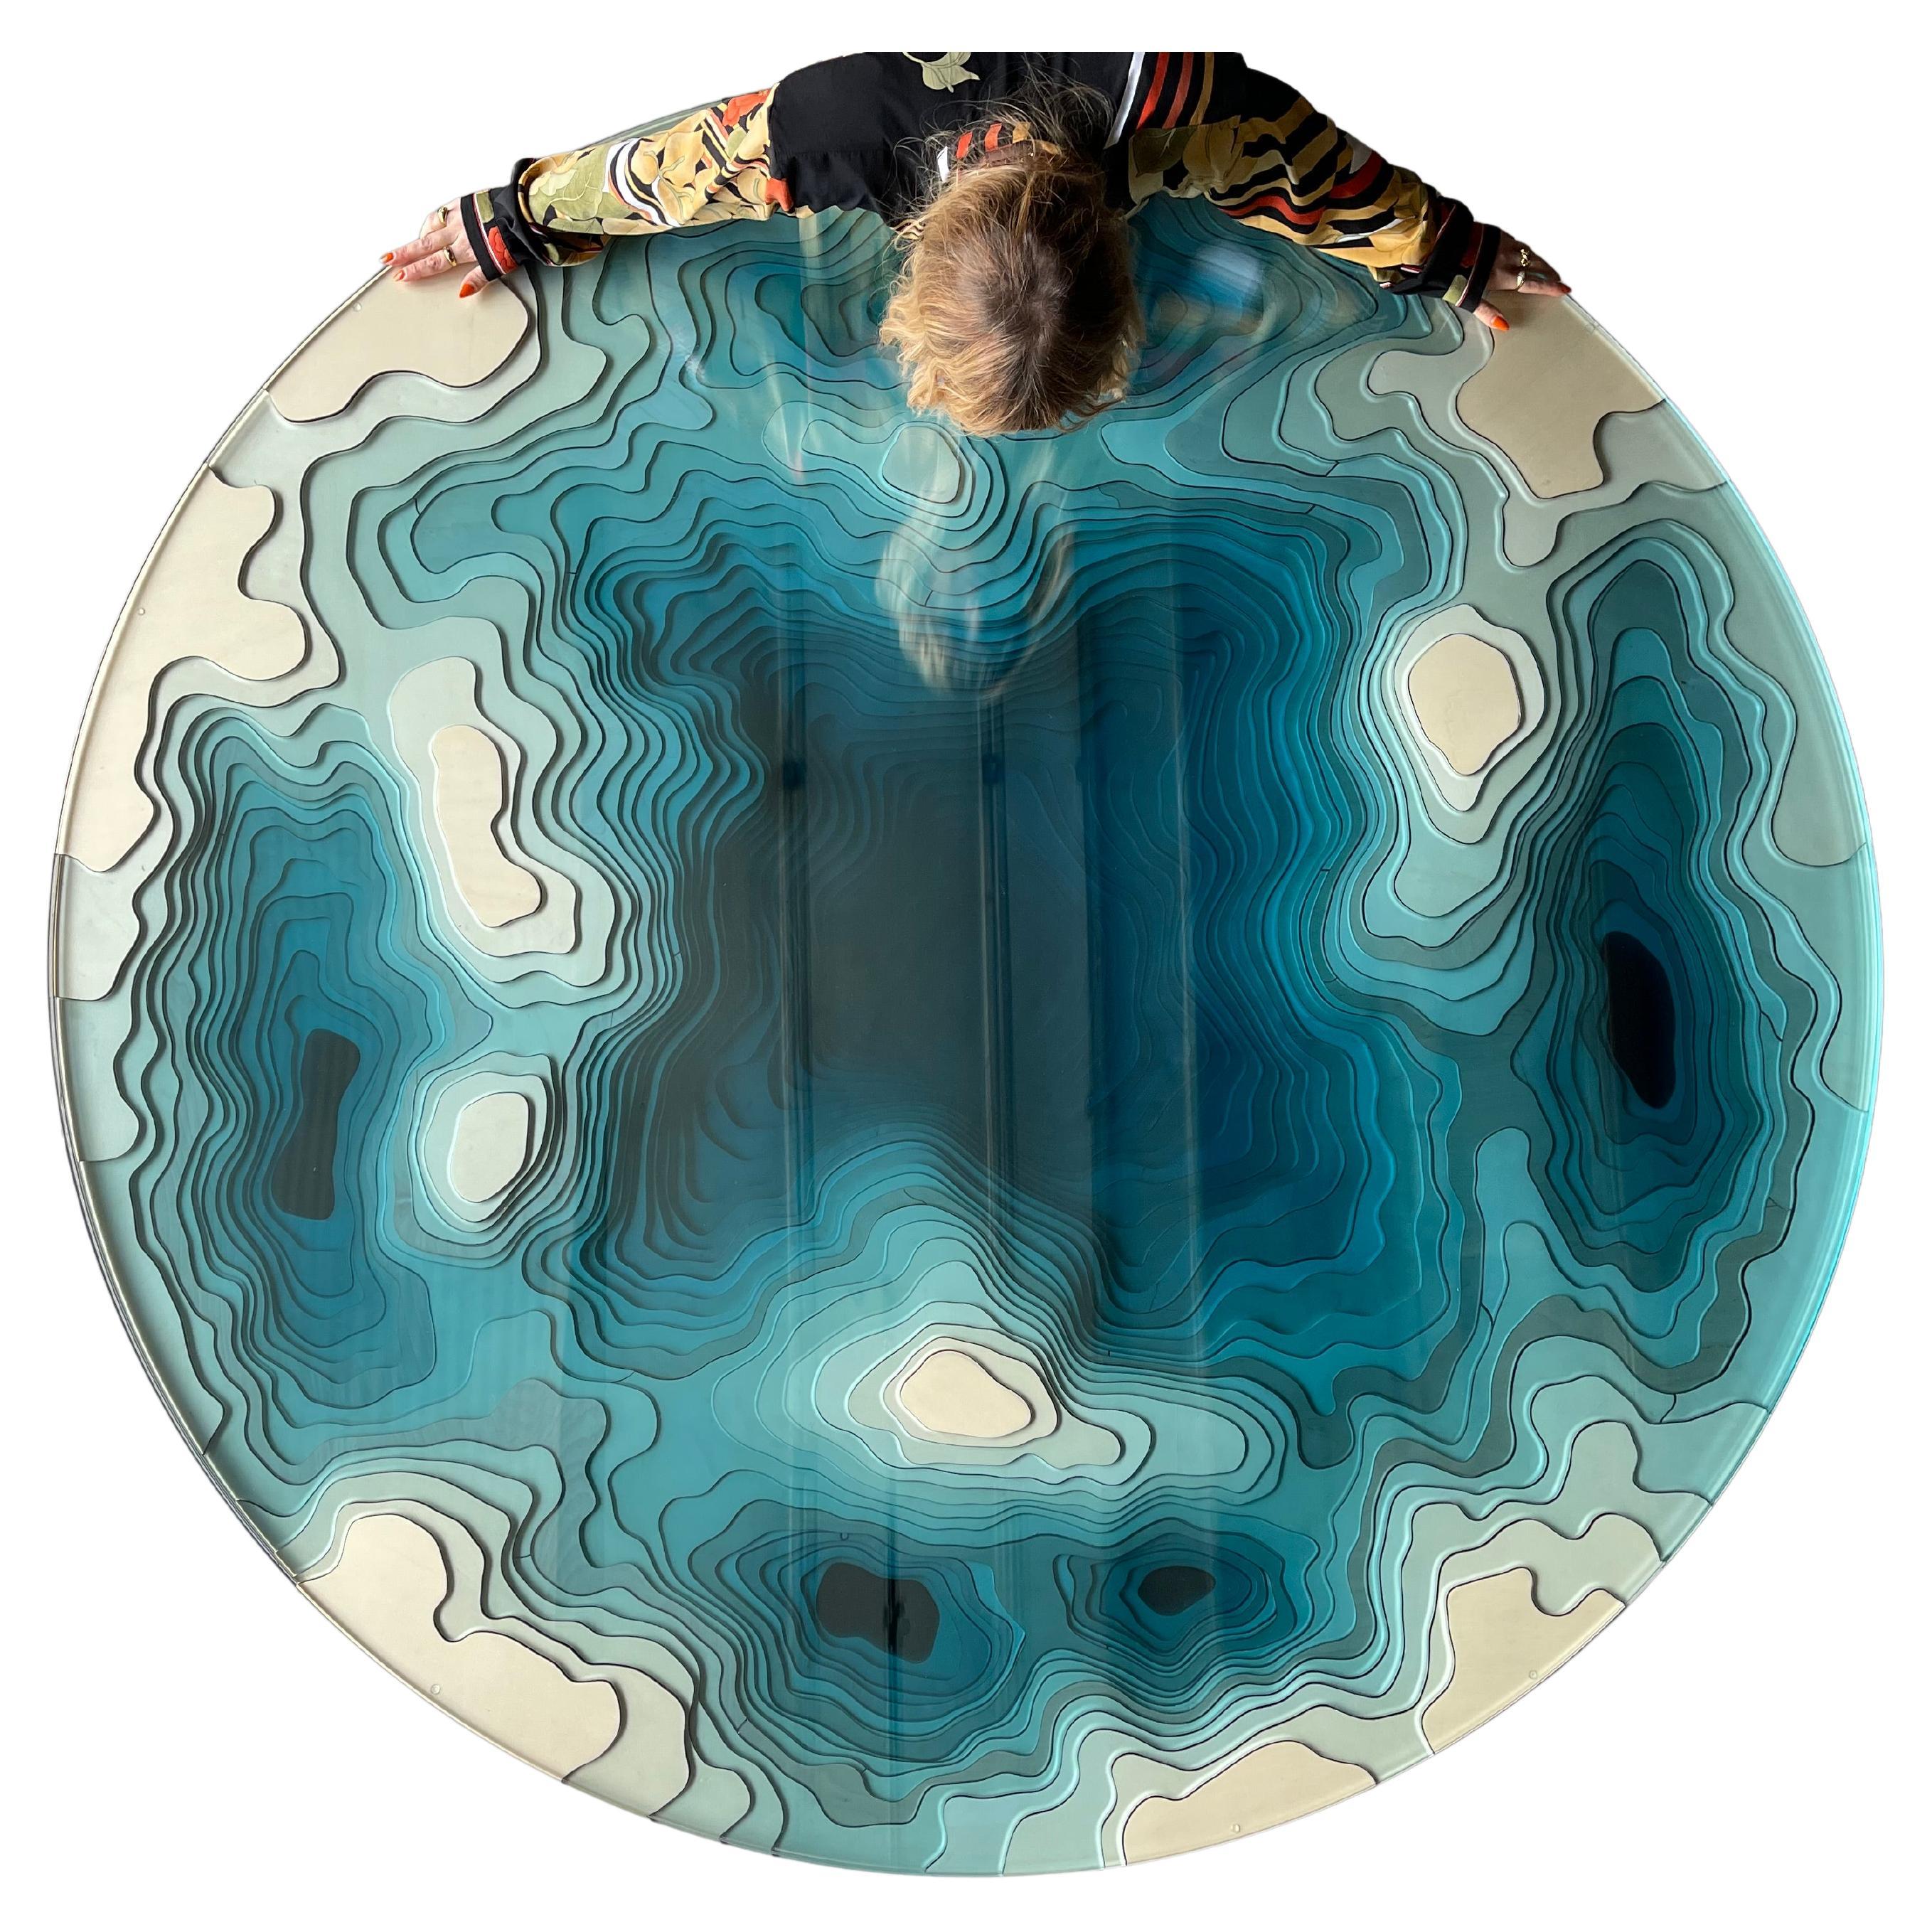 Abyss dining table expands Duffy’s explorations of the concept of depth with a mesmerising depiction of the Earth’s seabed, played out in vivid turquoise colours and grounded in a resplendent mirror polished stainless steel or matte black